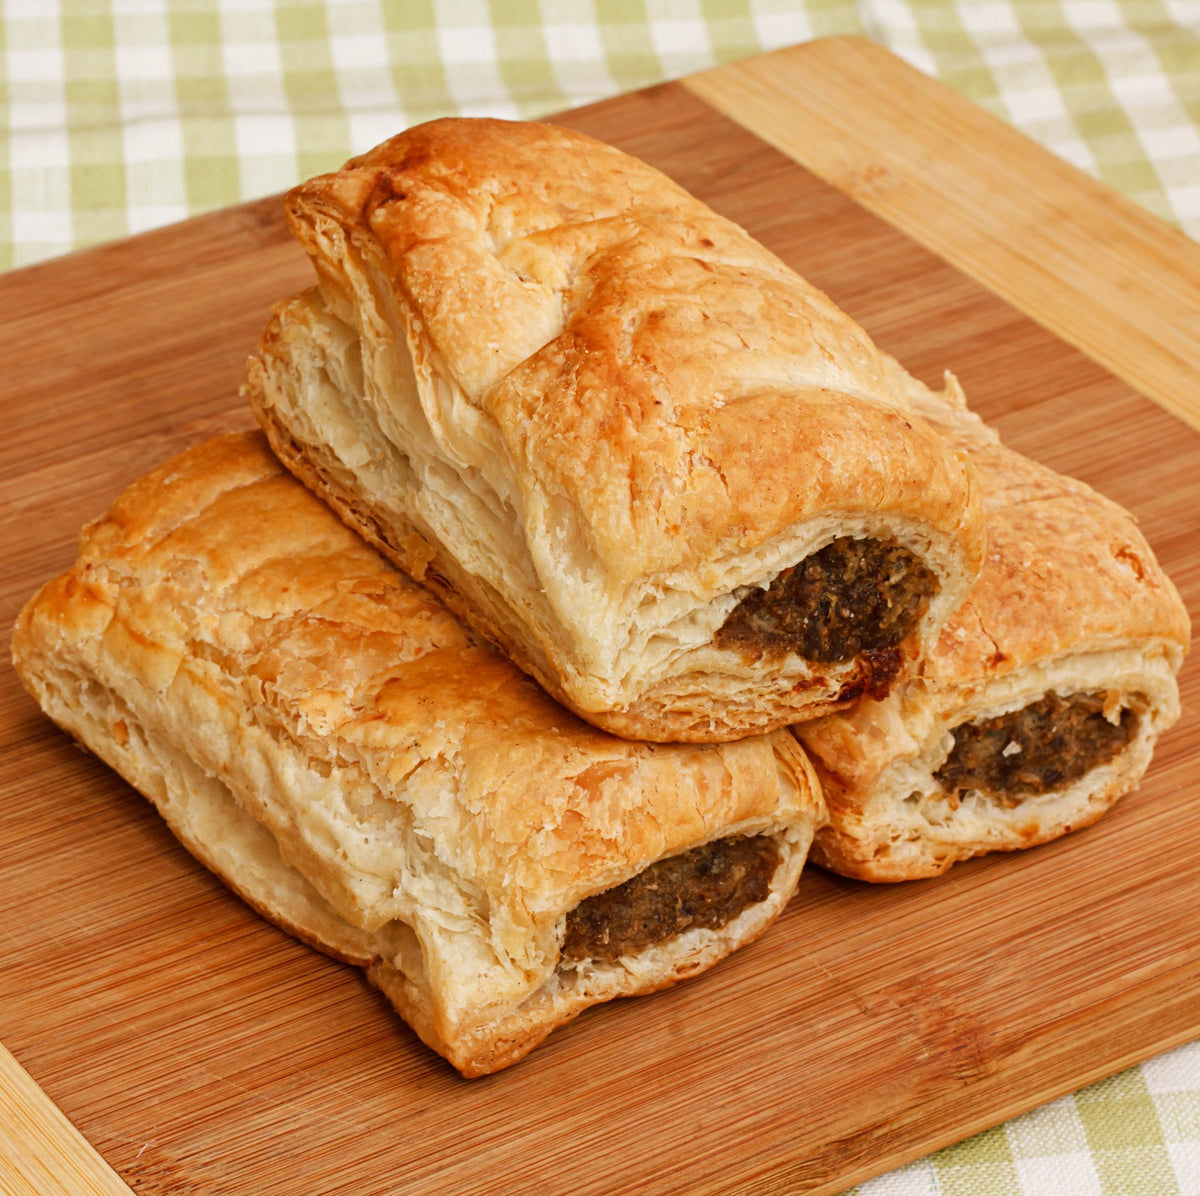 Sausage Rolls Assembly Instructions